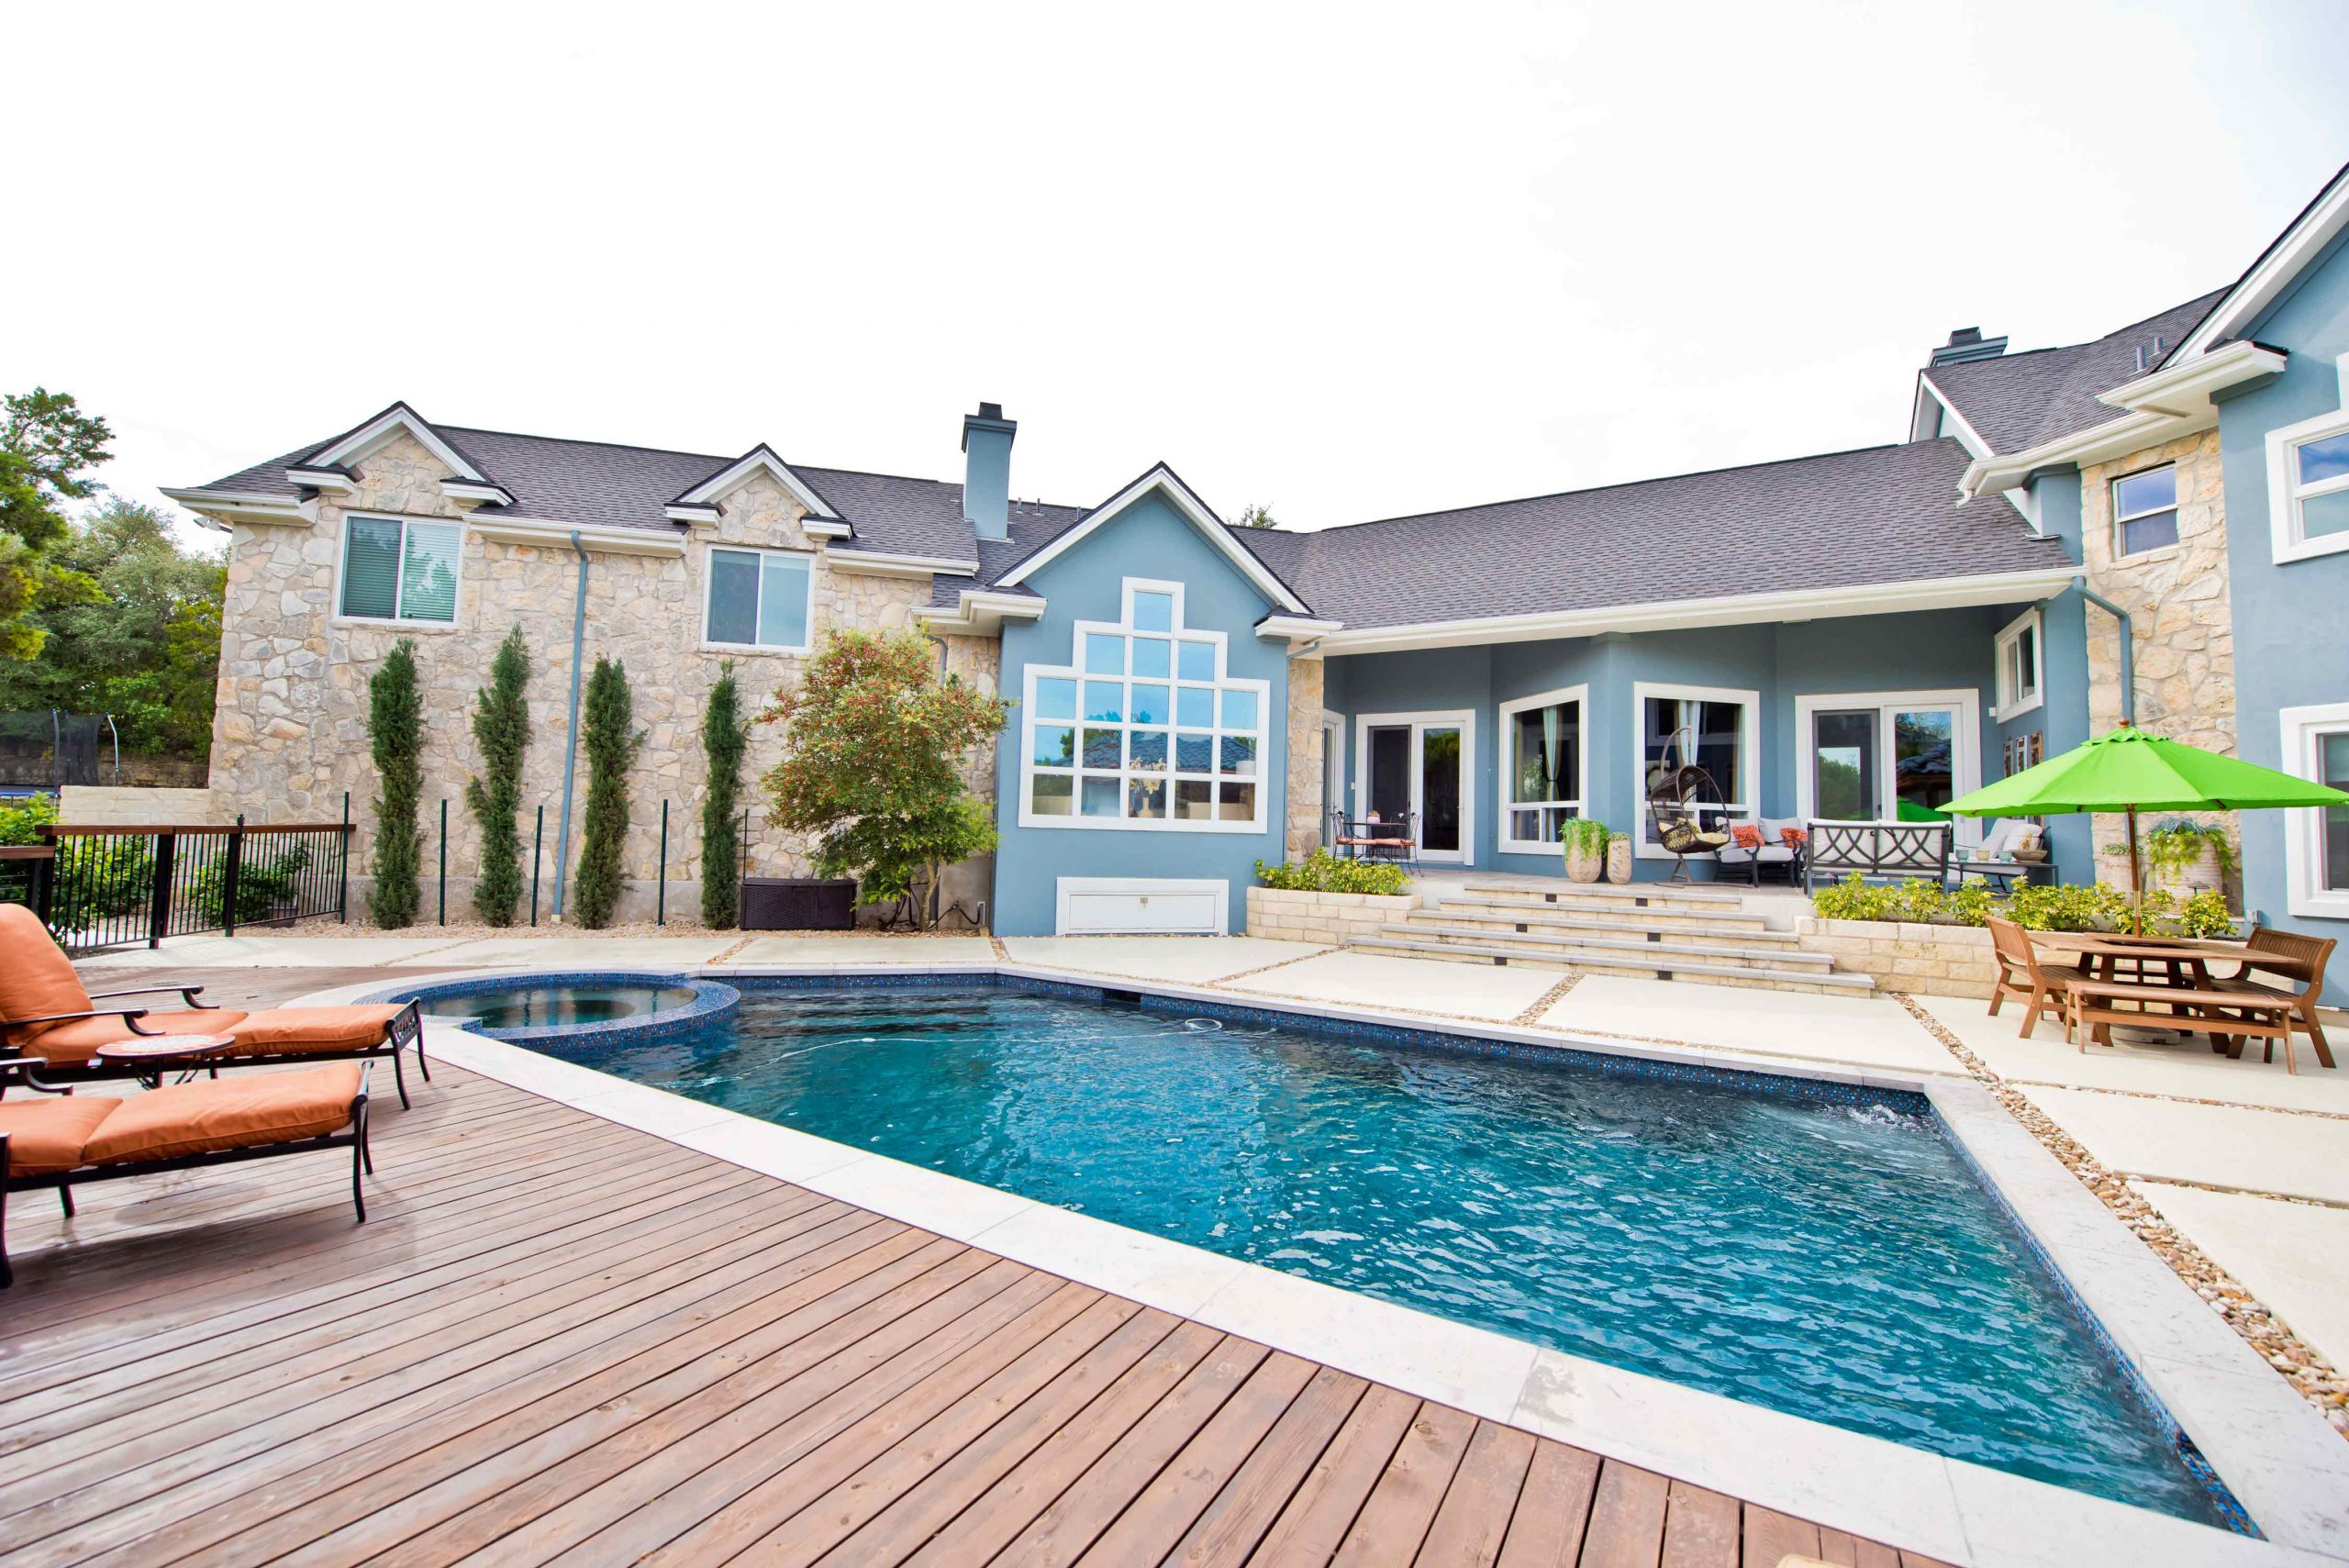 Best Pool Remodeling For